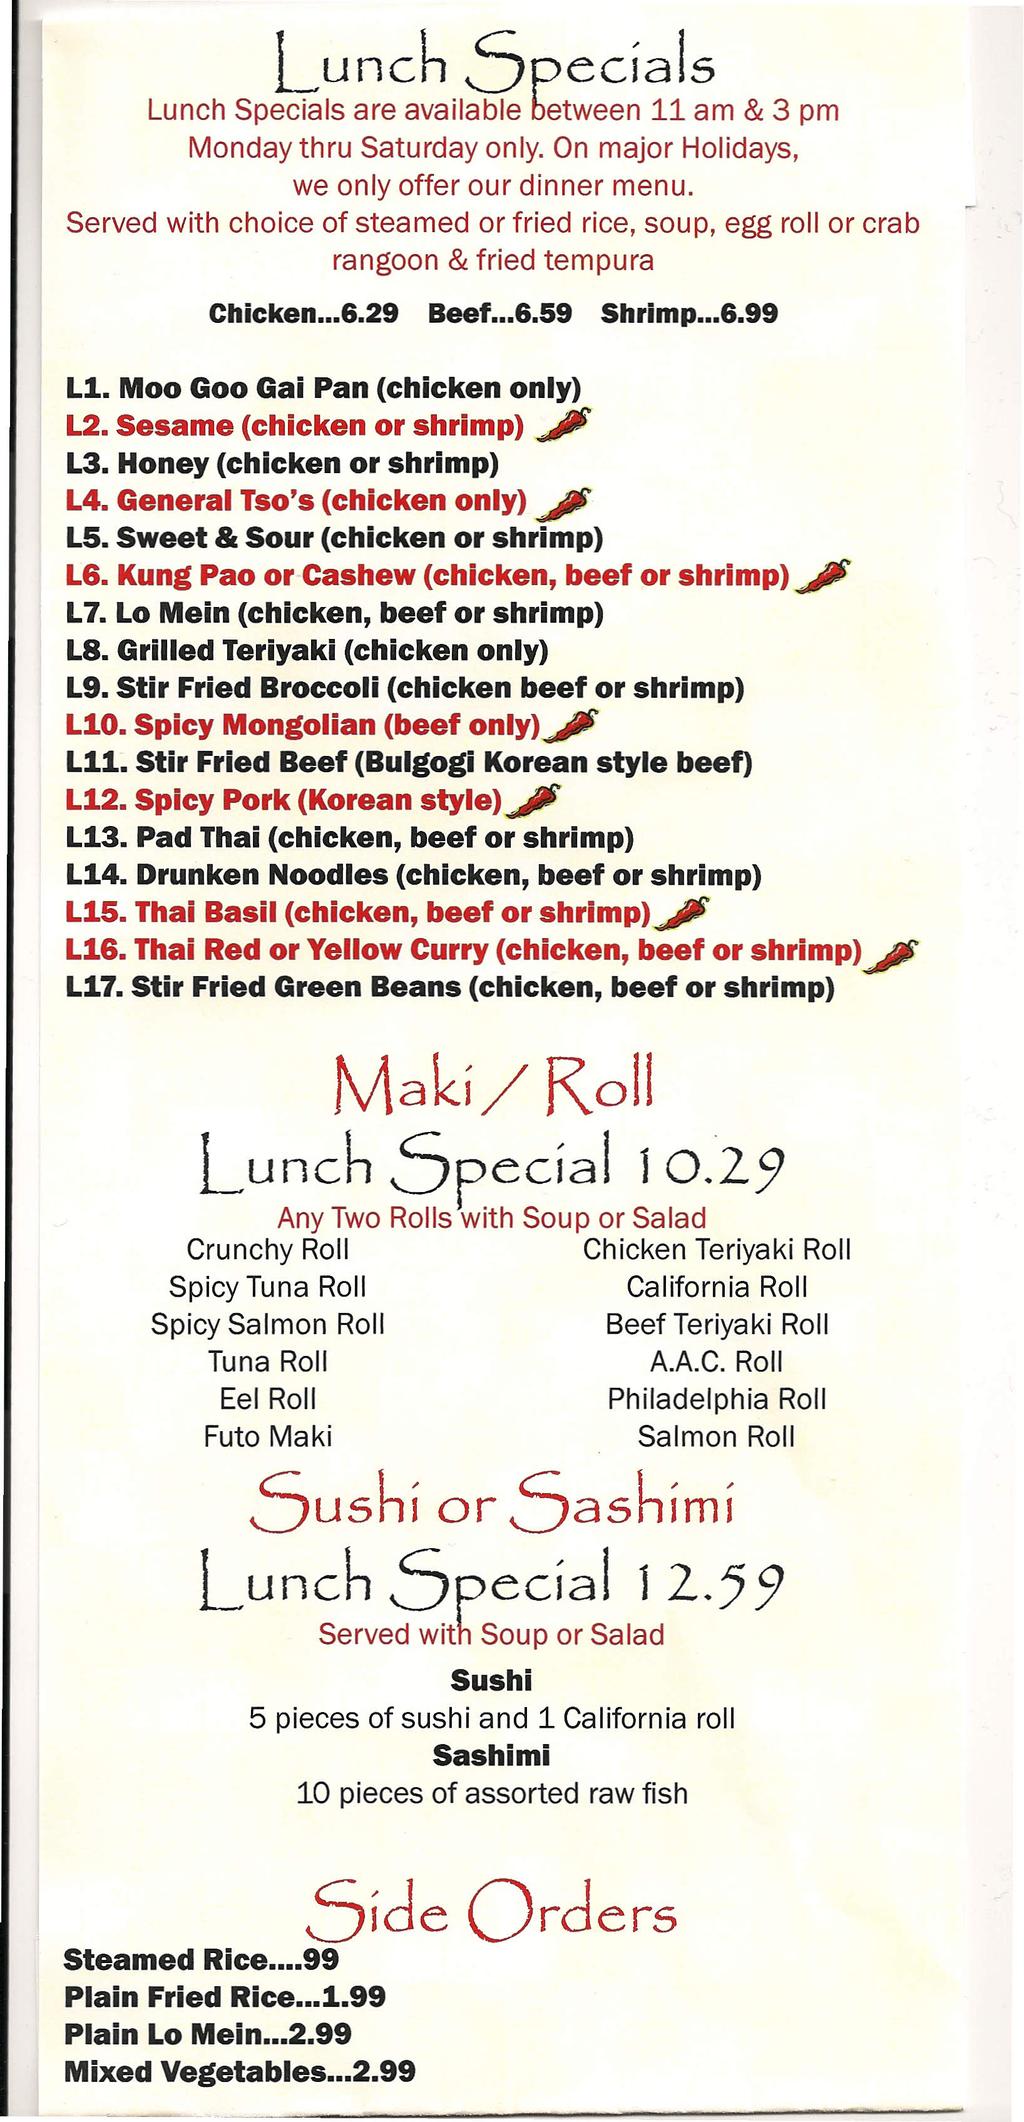 Lunch Specials Lunch Specials are available between 11 am & 3 pm Monday thru Saturday only. On major Holidays, we only offer our dinner menu.